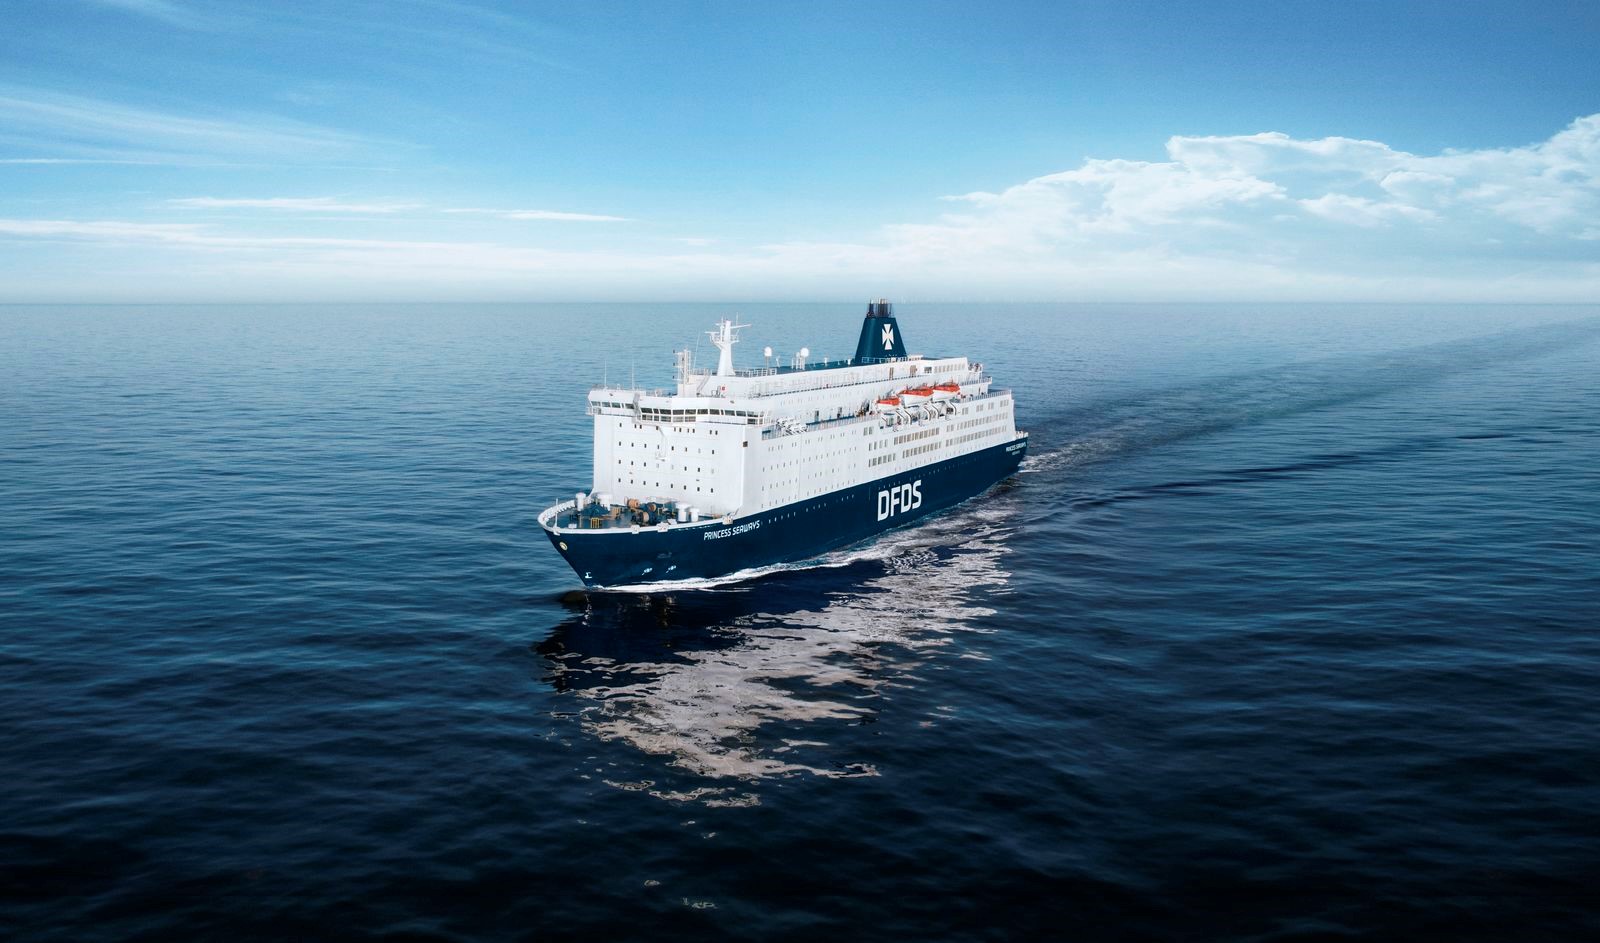 DFDS launches climate action plan